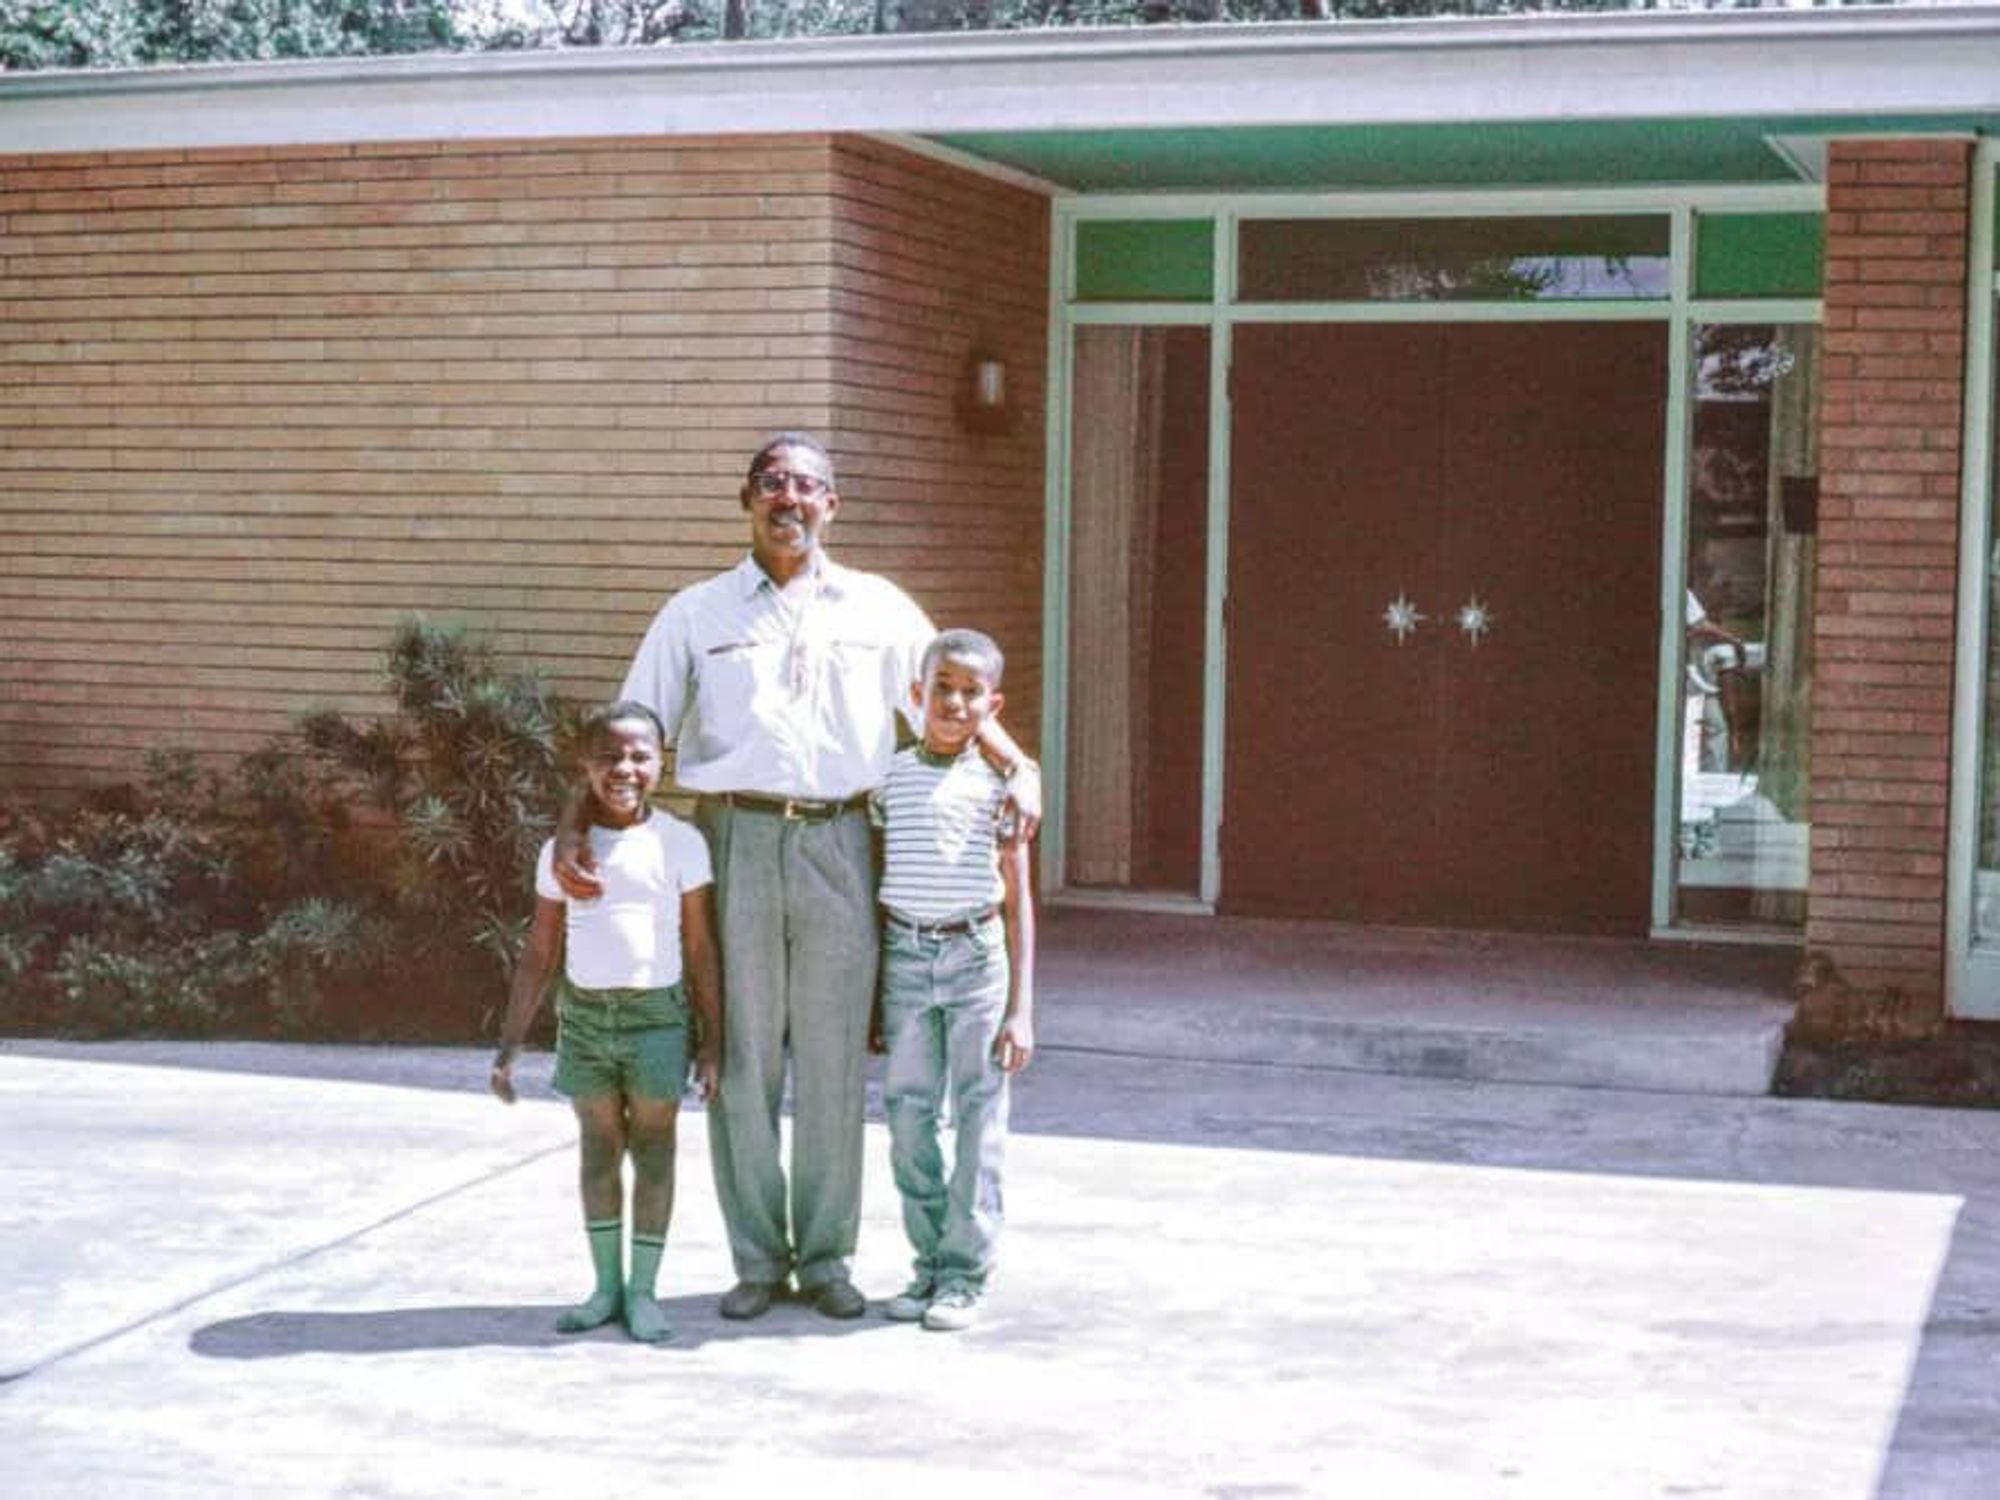 John S. Chase stands in front of his family home in Houston with two of his three children, Anthony (left) and John Jr. (right).